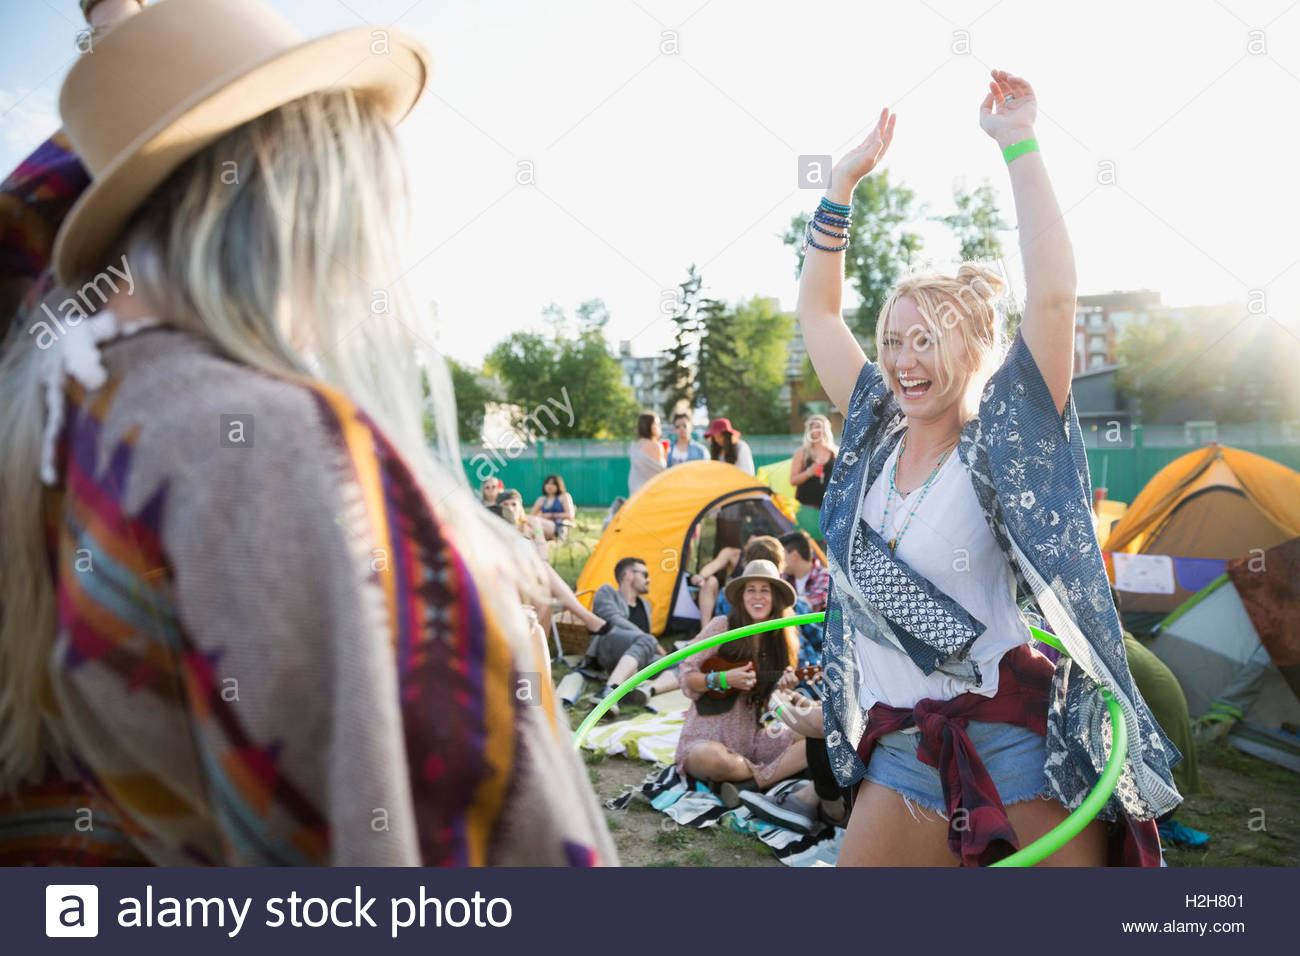 Playful young woman spinning with plastic hoop at summer music festival campsite Stock Photo